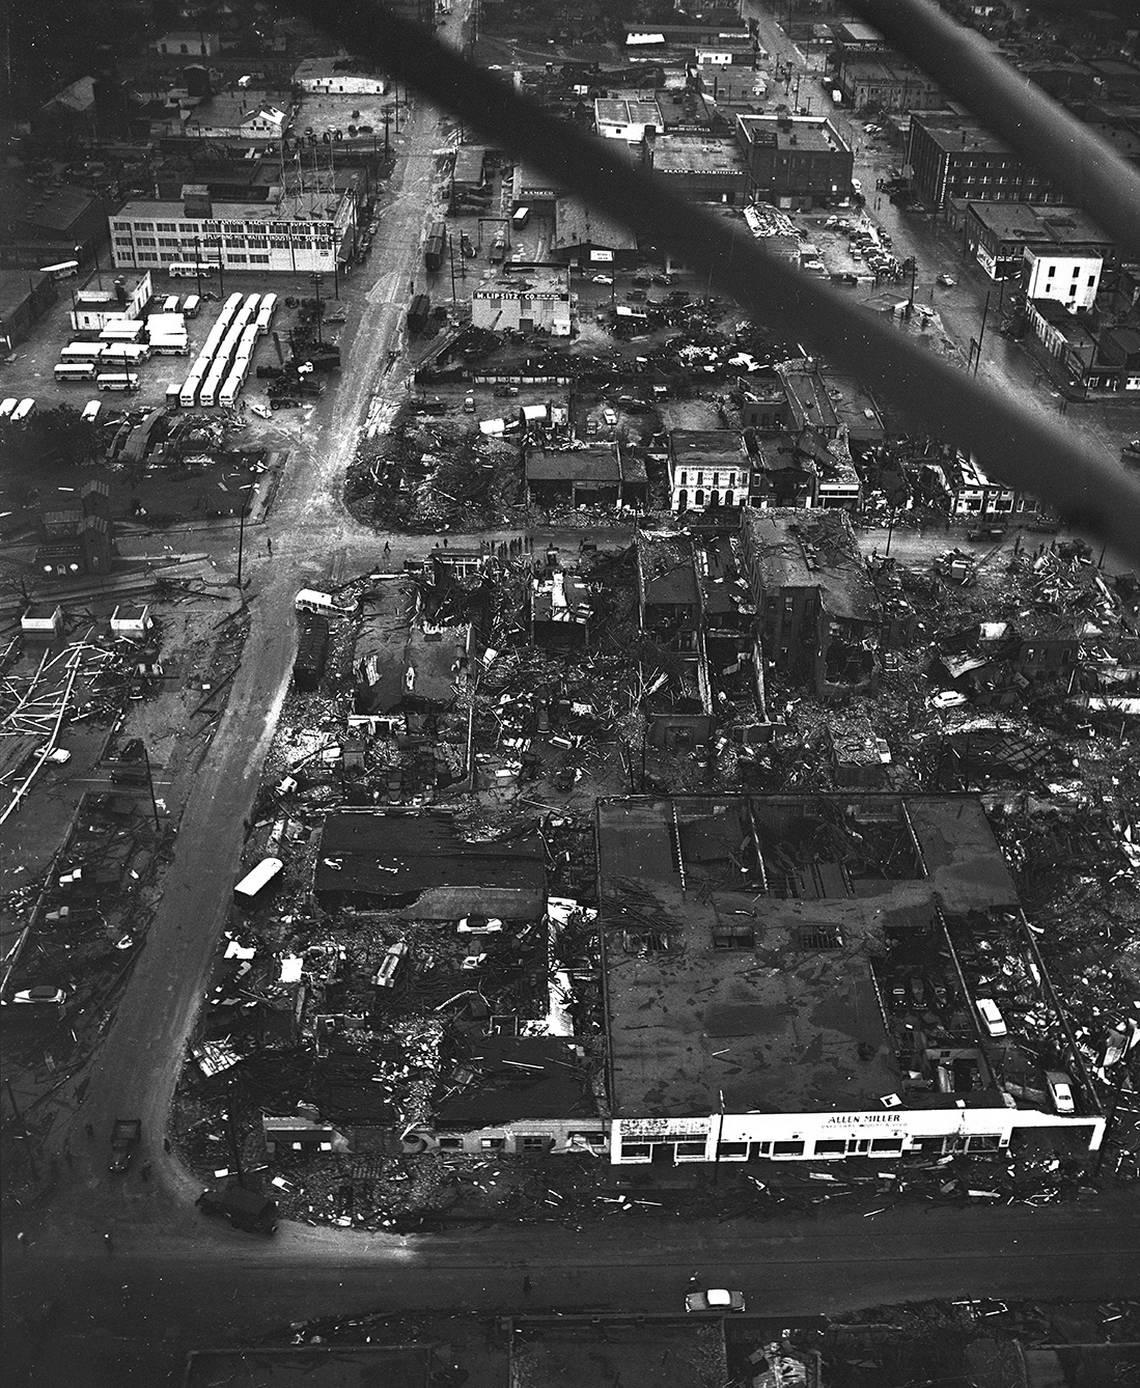 Downtown Waco after the 1953 tornado. At upper left, buses are parked at the Waco Transit Co. The road running from left to right at center of photo is the business route, U. S. Highway 81. Fort Worth Star-Telegram Collection/UT Arlington Special Collections